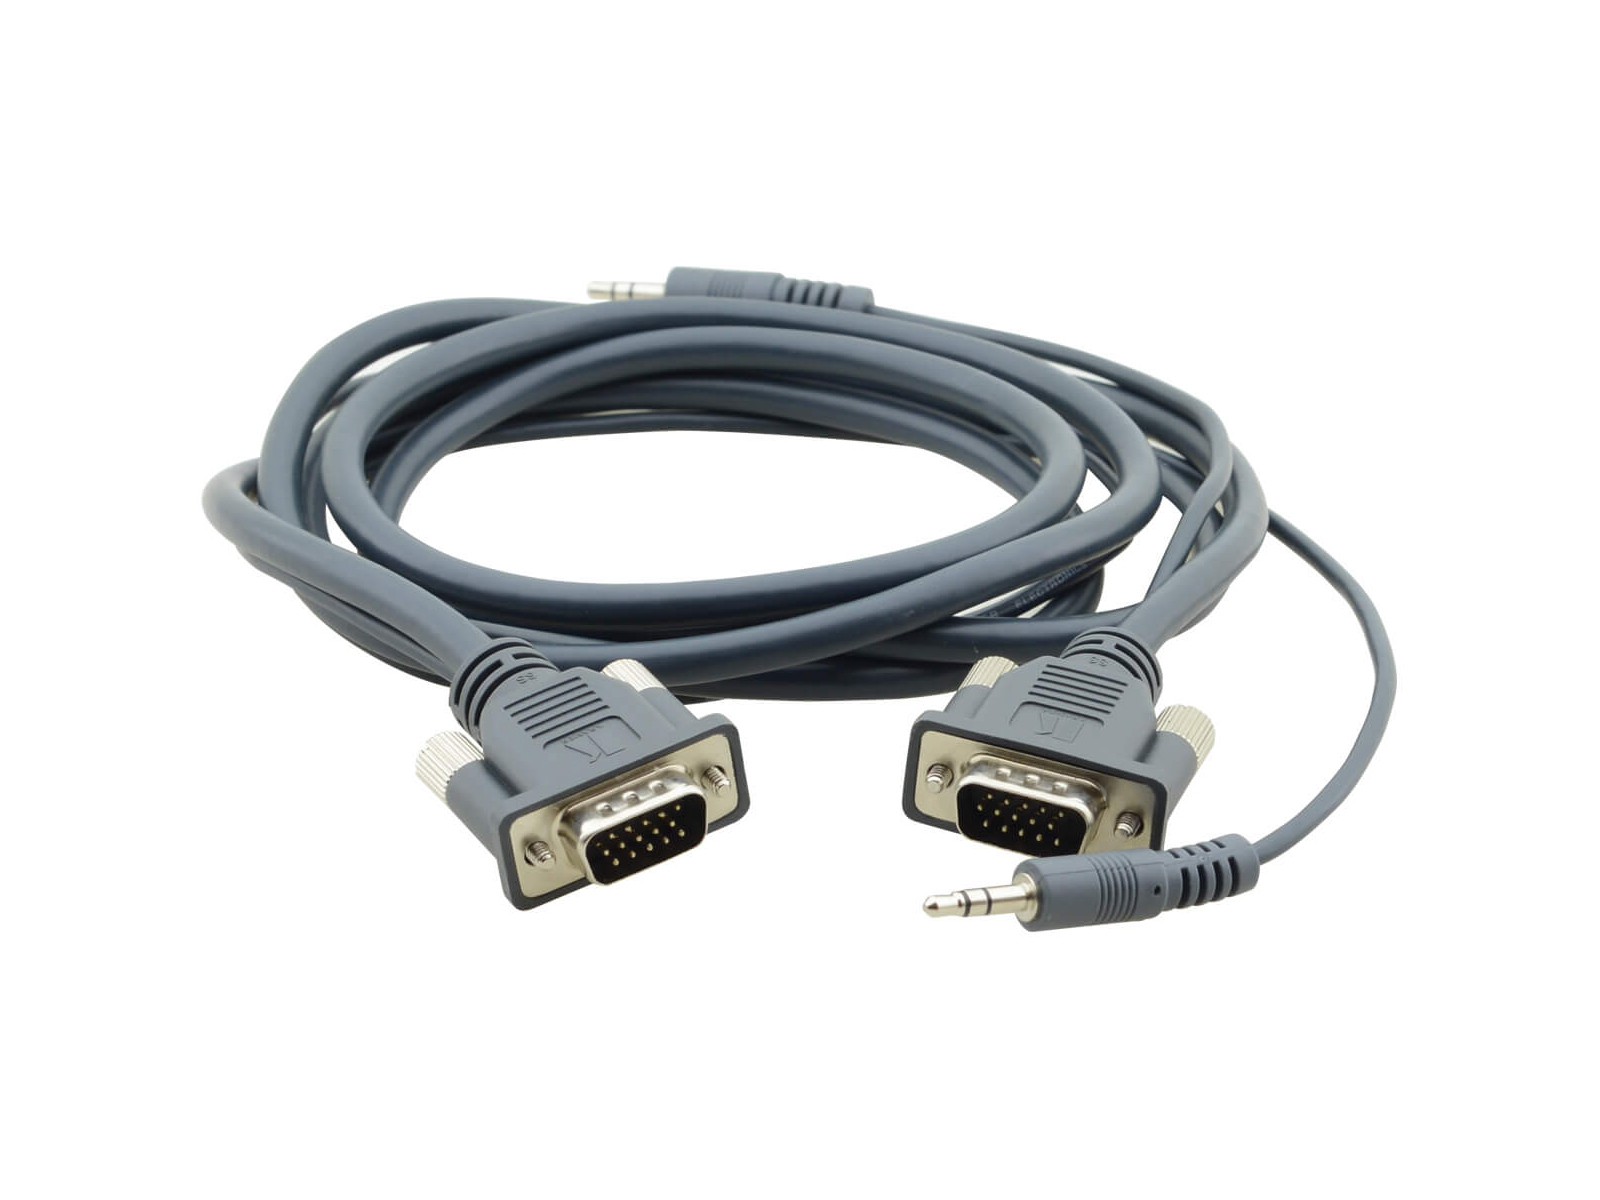 C-MGMA/MGMA-25 15-Pin (M) to 15-Pin (M)   3.5mm Micro VGA Cable - 25ft by Kramer